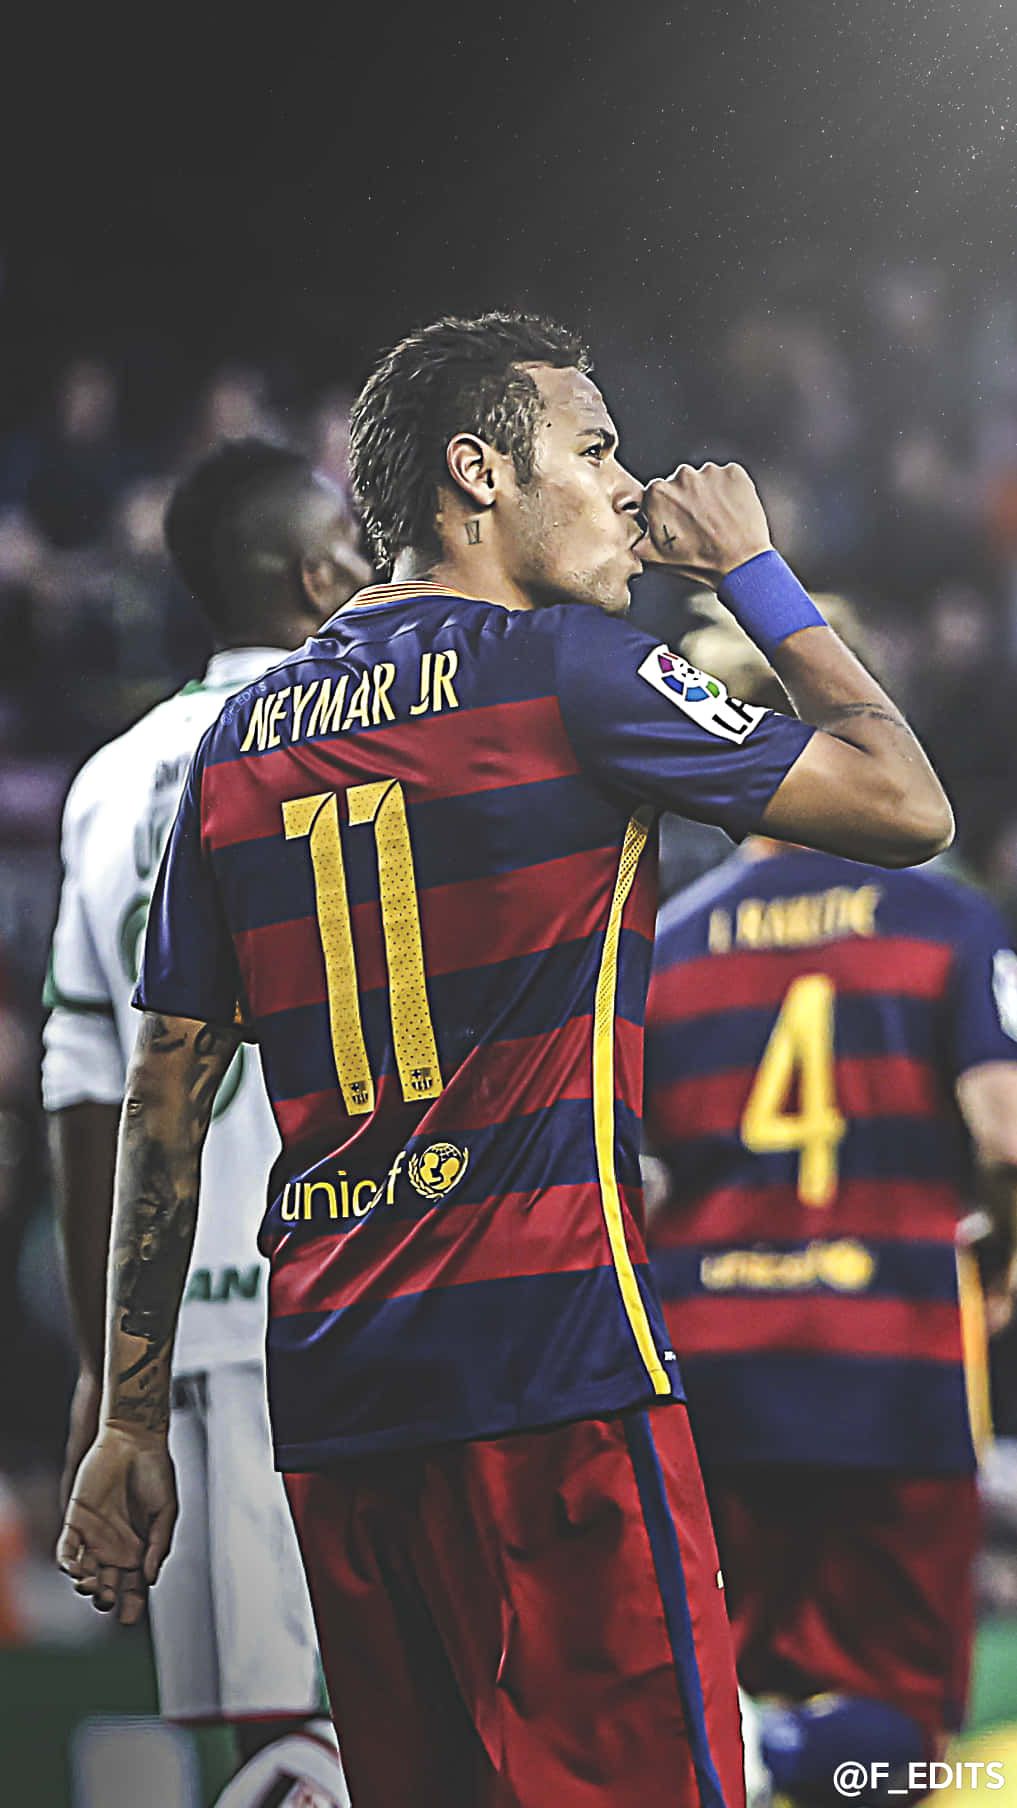 Neymar Jr Wallpaper iPhone resolution 1080x1920 px, you can use this wallpaper for your iPhone 5, 6, 7, 8, X, XS, XR backgrounds, Mobile Screensaver, or iPad Lock Screen - Neymar